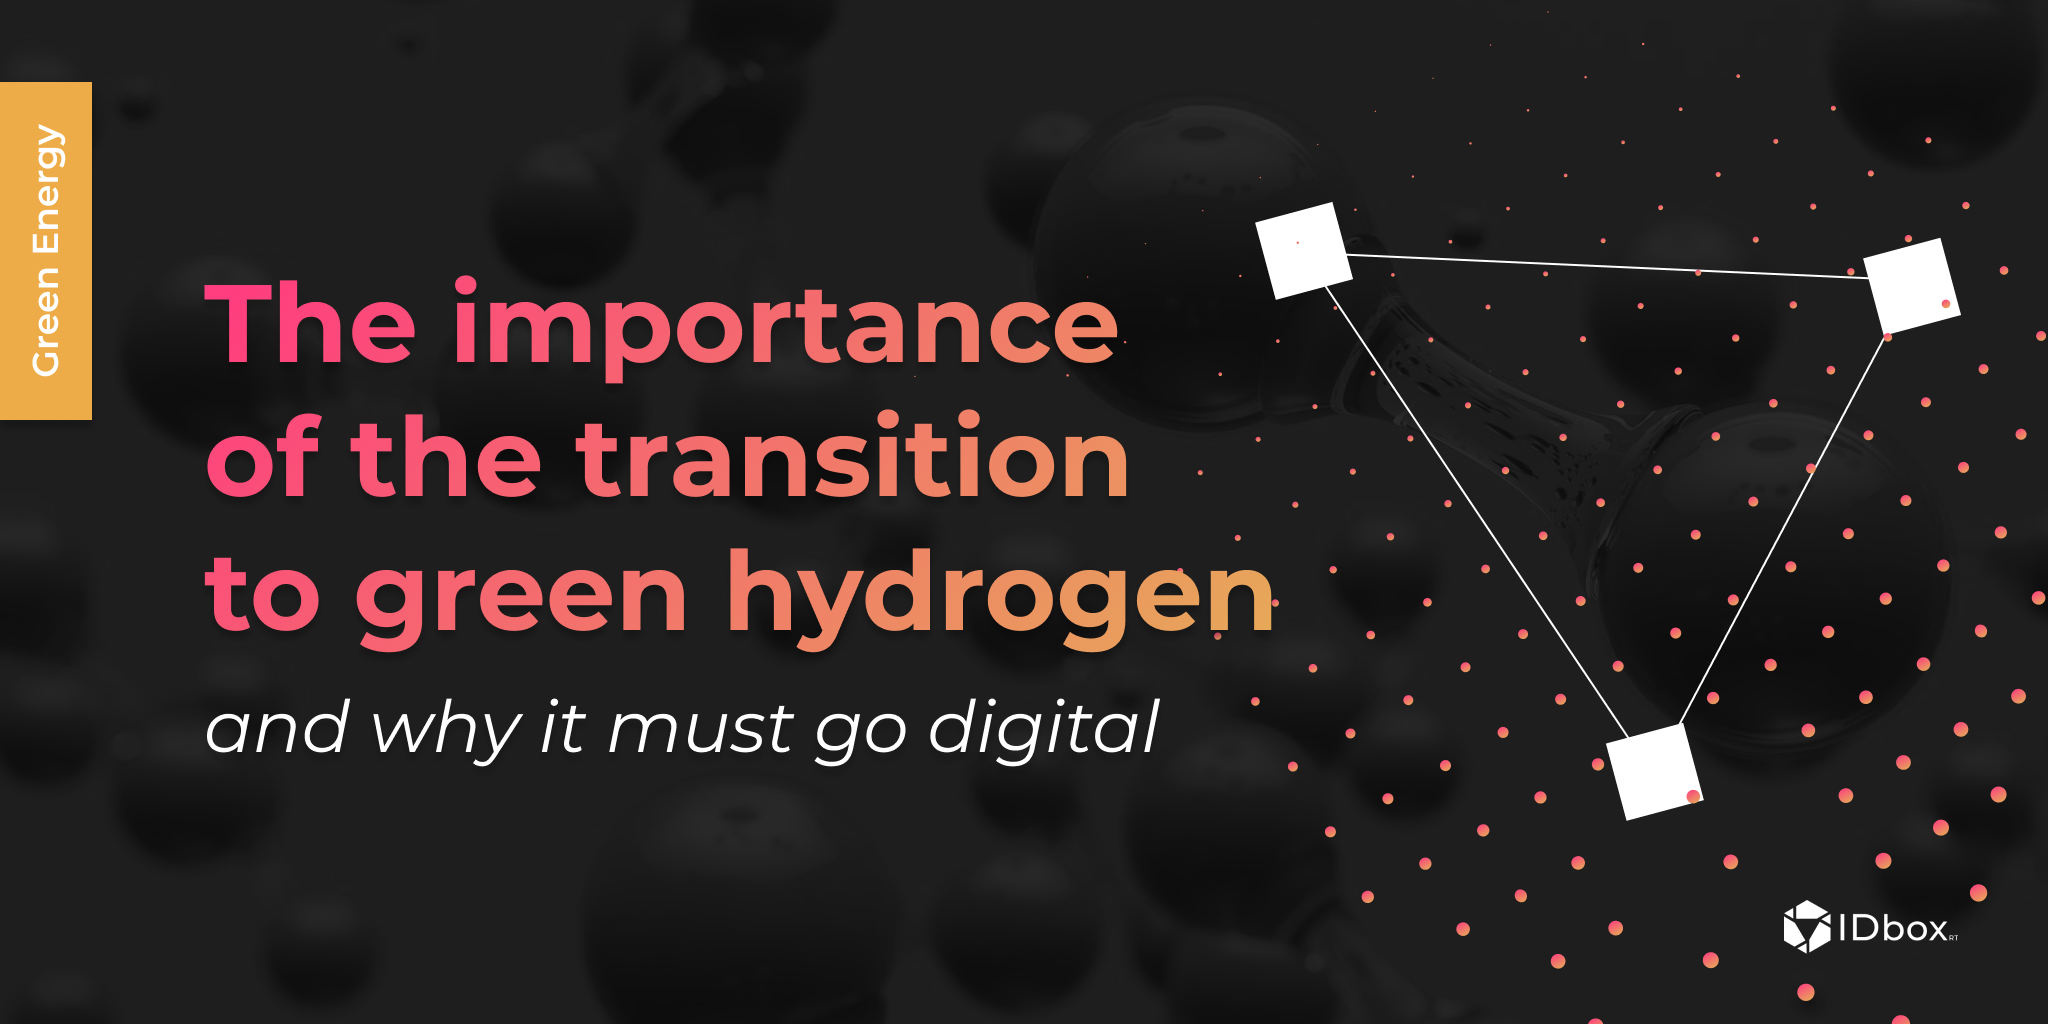 The importance of the transition to green hydrogen and why it must go digital